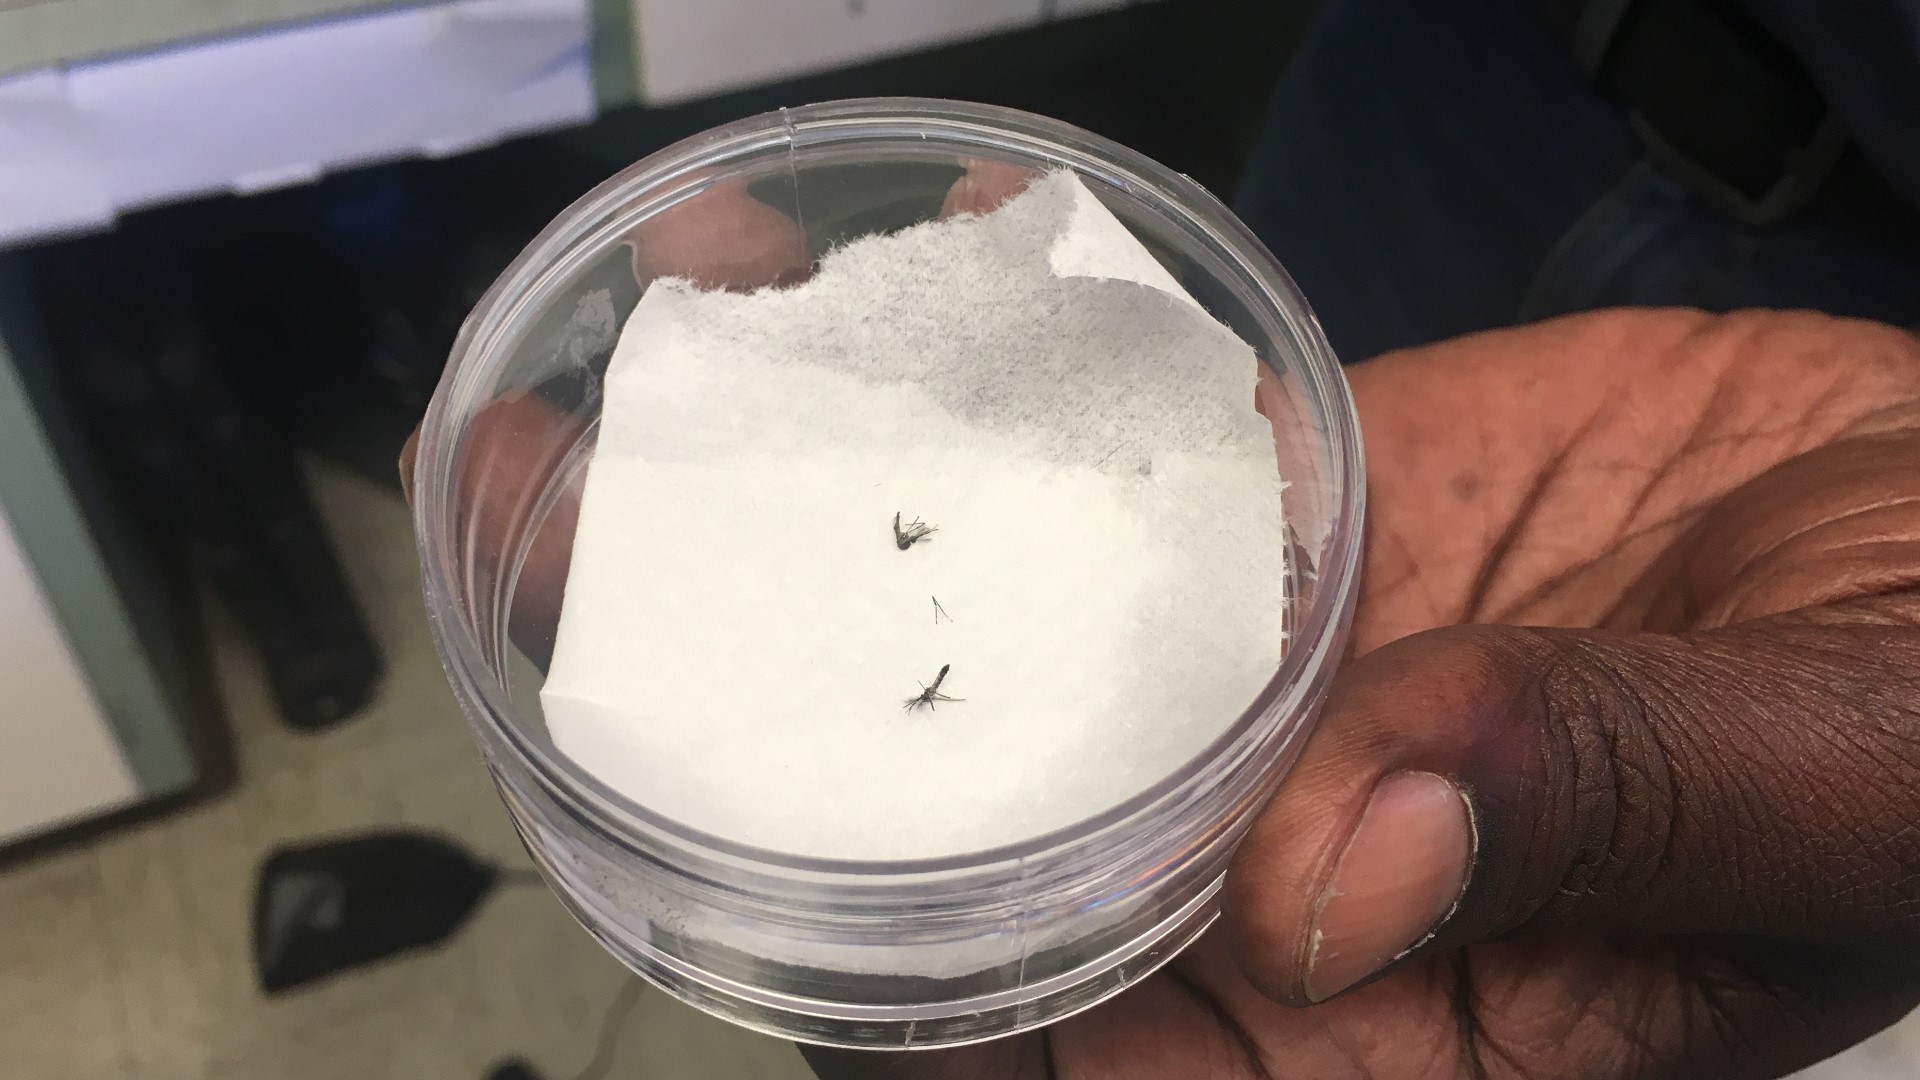 The mosquitoes were initially found in traps in a neighborhood near Lakewood Avenue and Scenic Drive on July 25th and then again on July 31st.